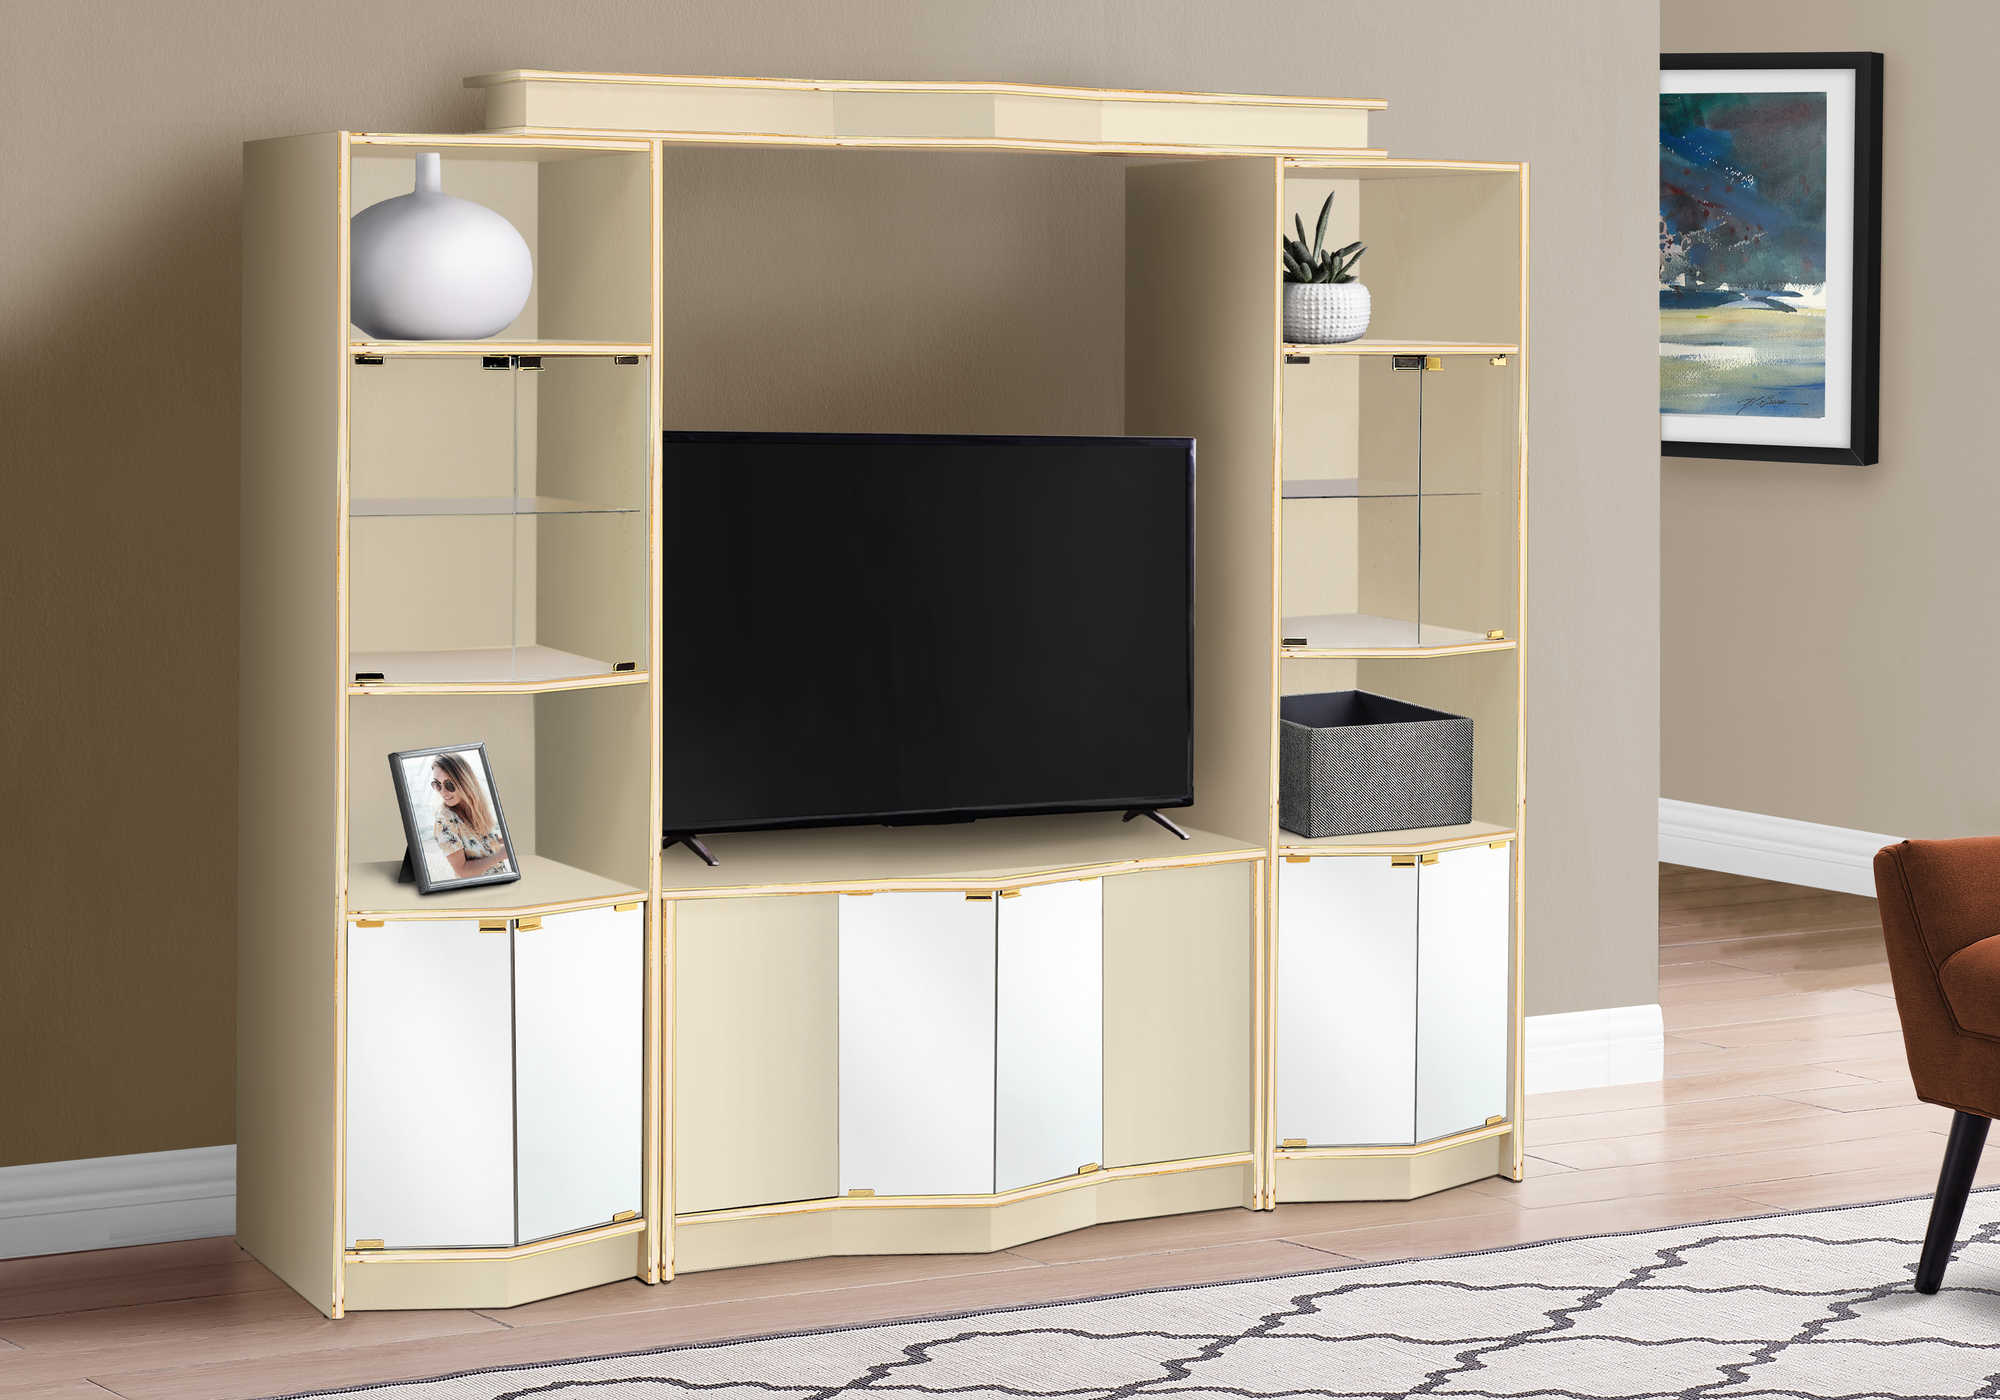 WALL UNIT - HT 851 / HT 852 / HT 853 / CHAMPAGNE / GOLD